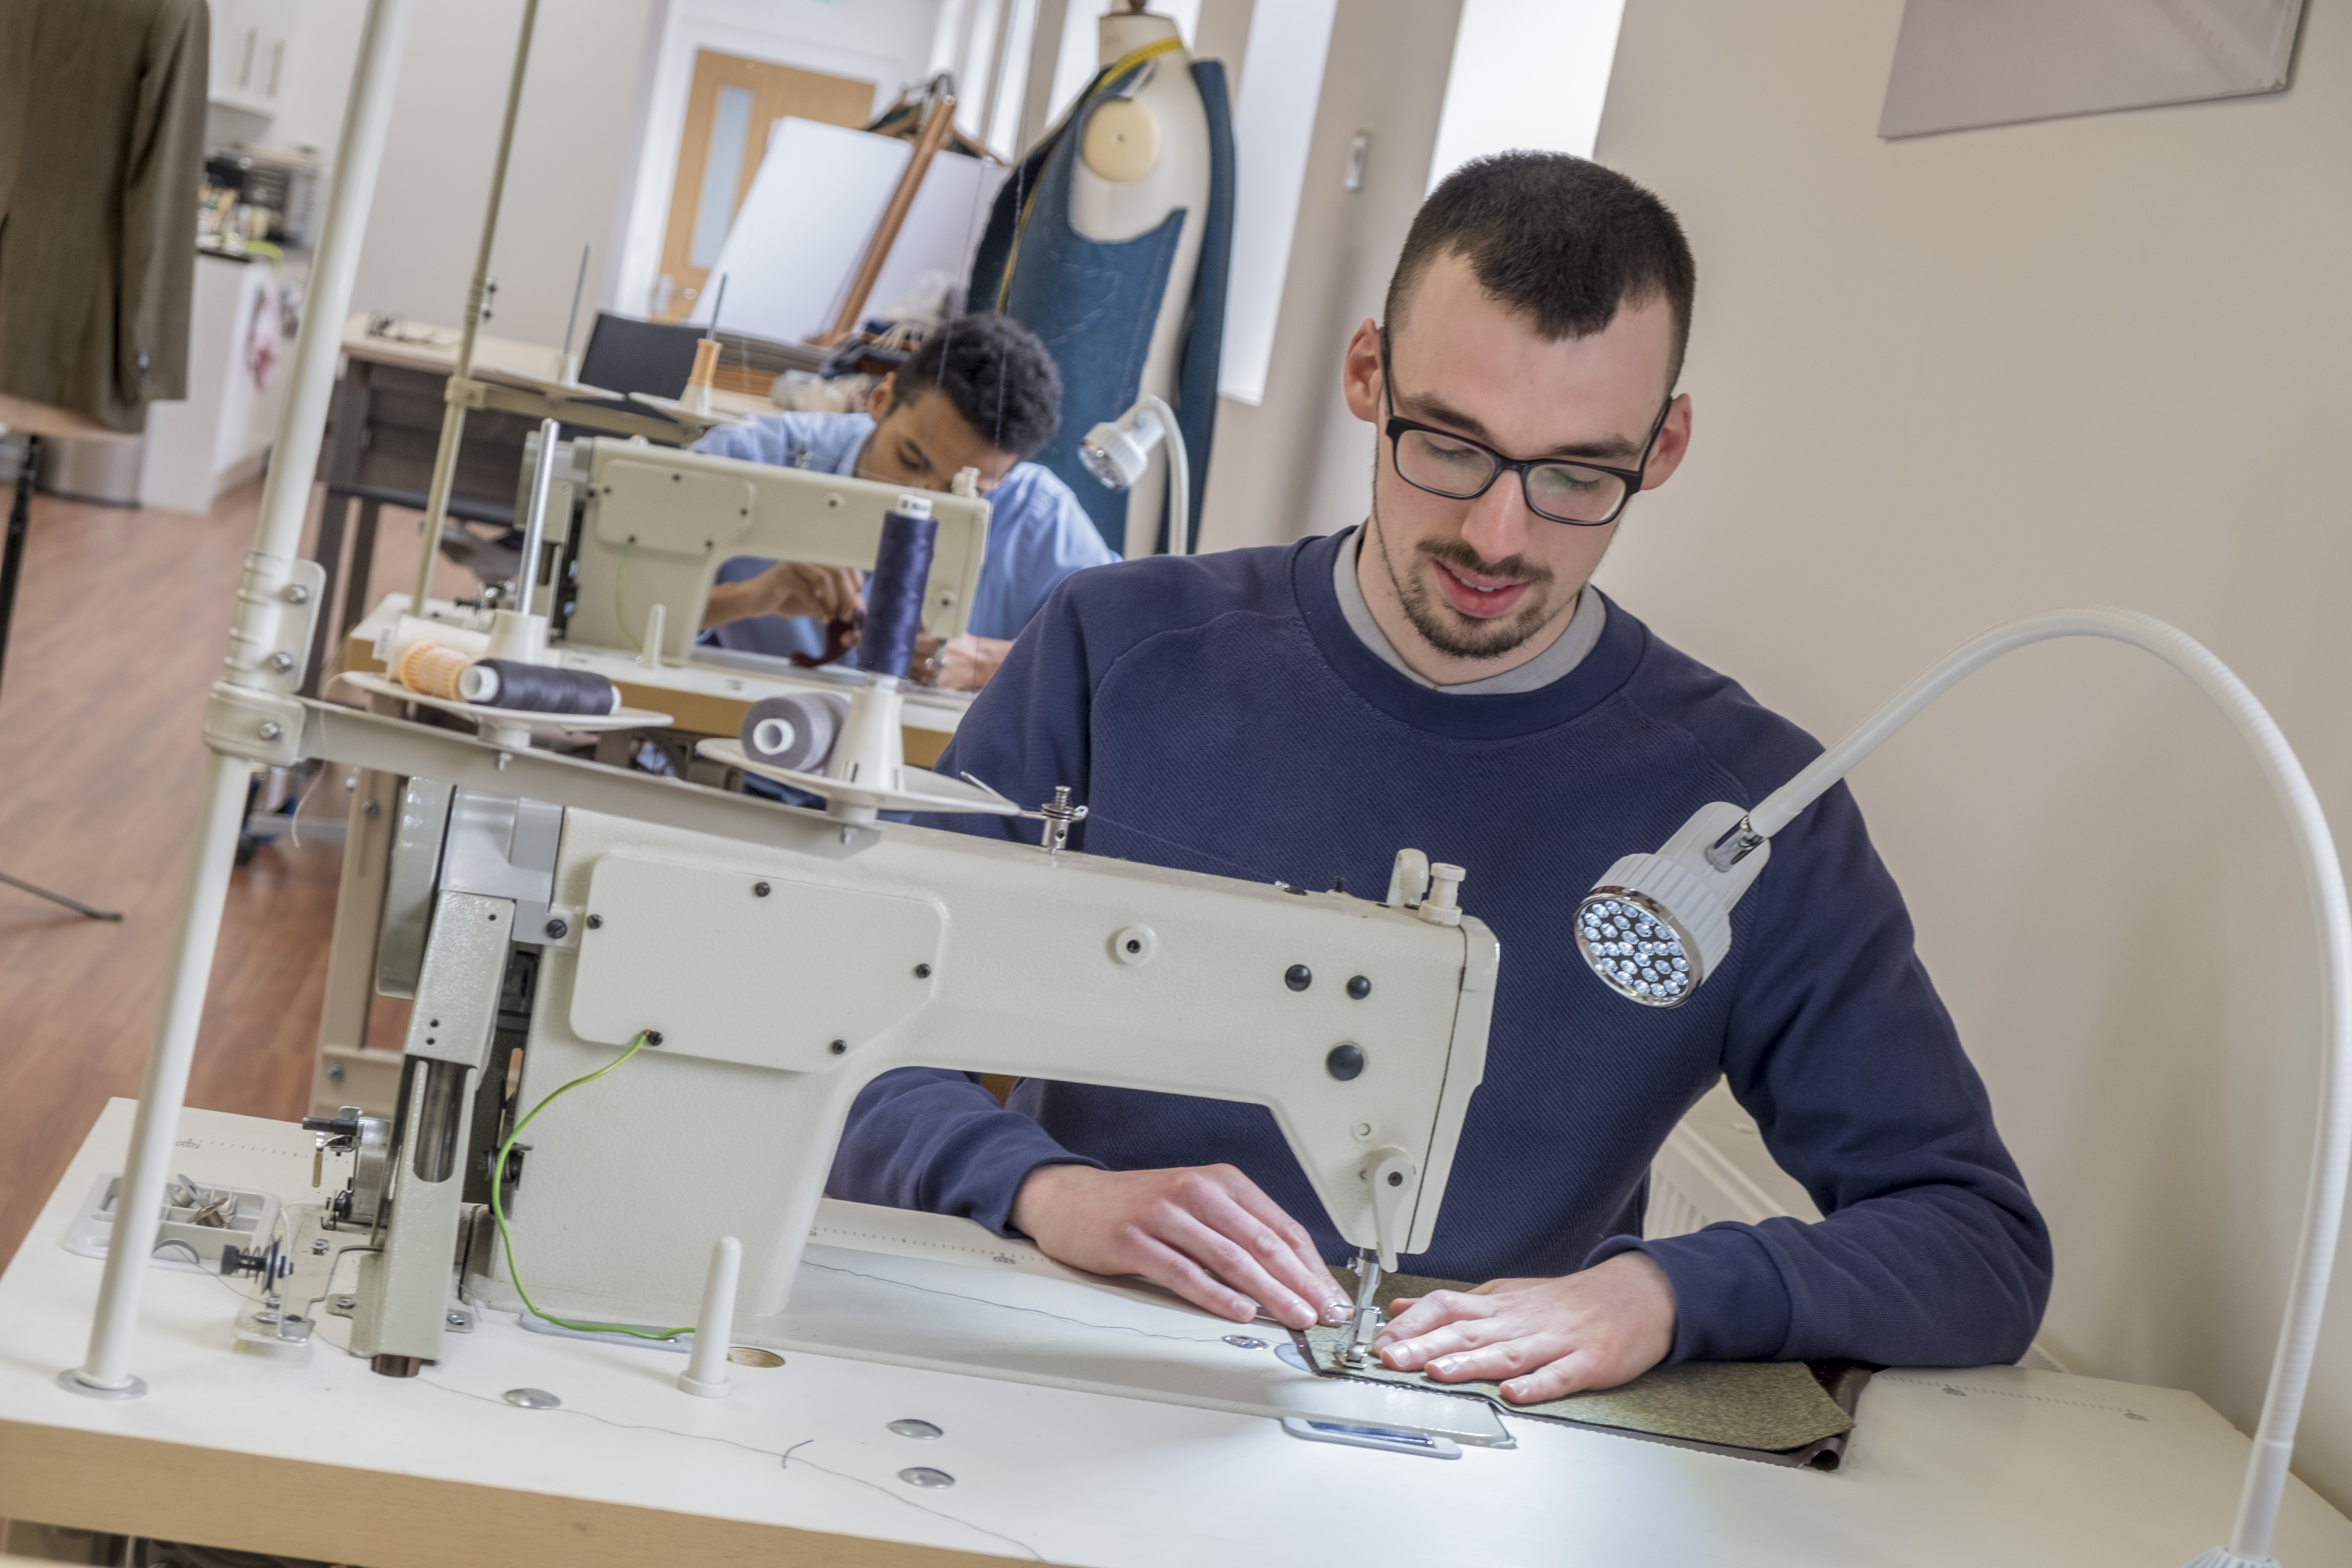 Practical Skills Training for the Next Generation of Bespoke Tailors